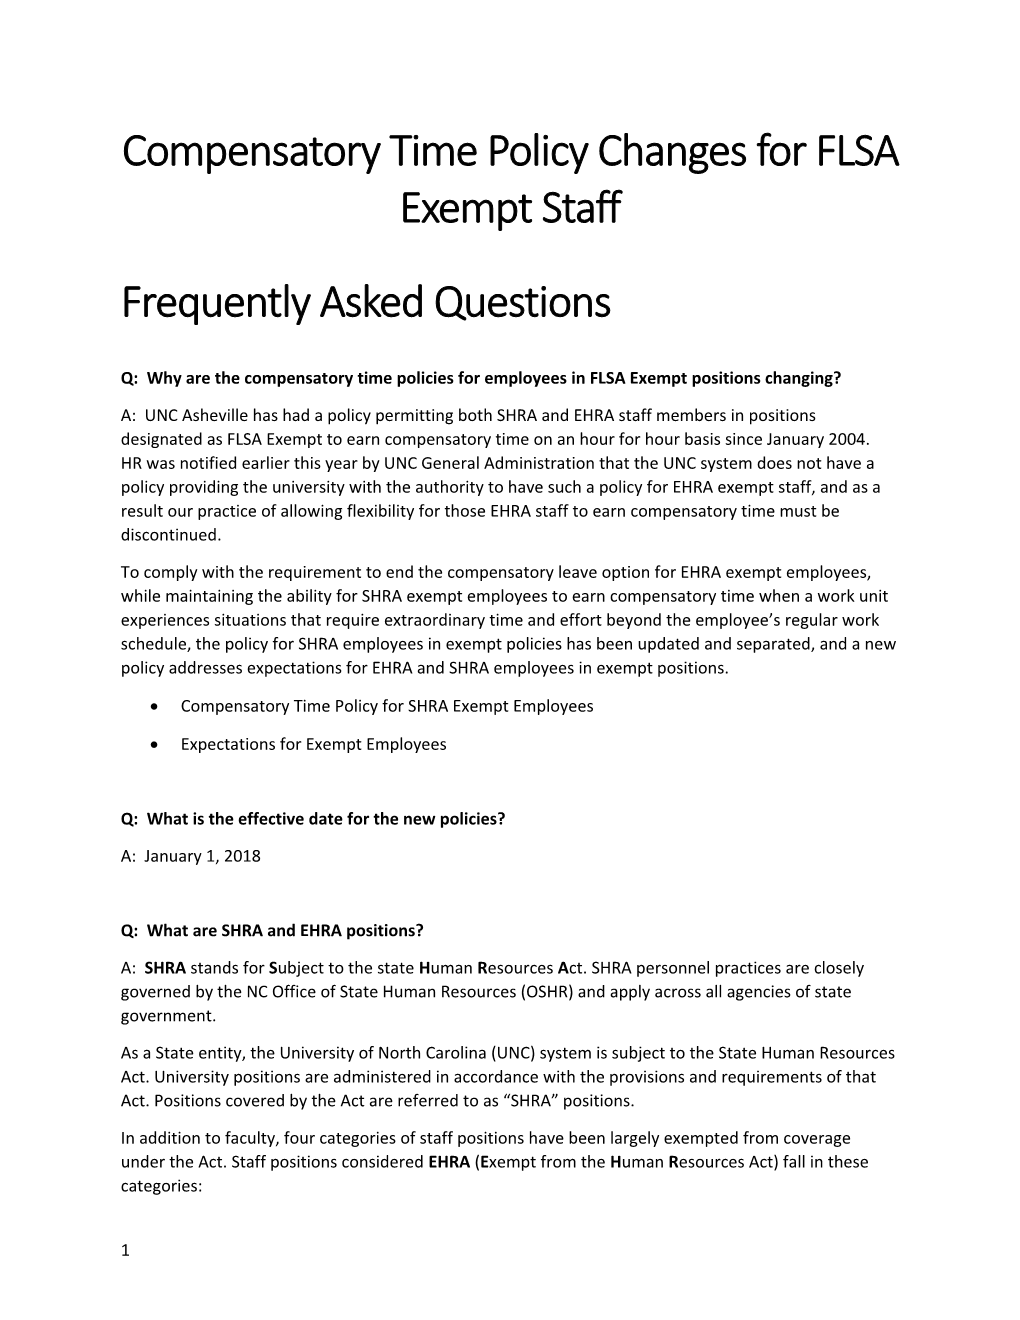 Compensatory Time Policy Changes for FLSA Exempt Staff